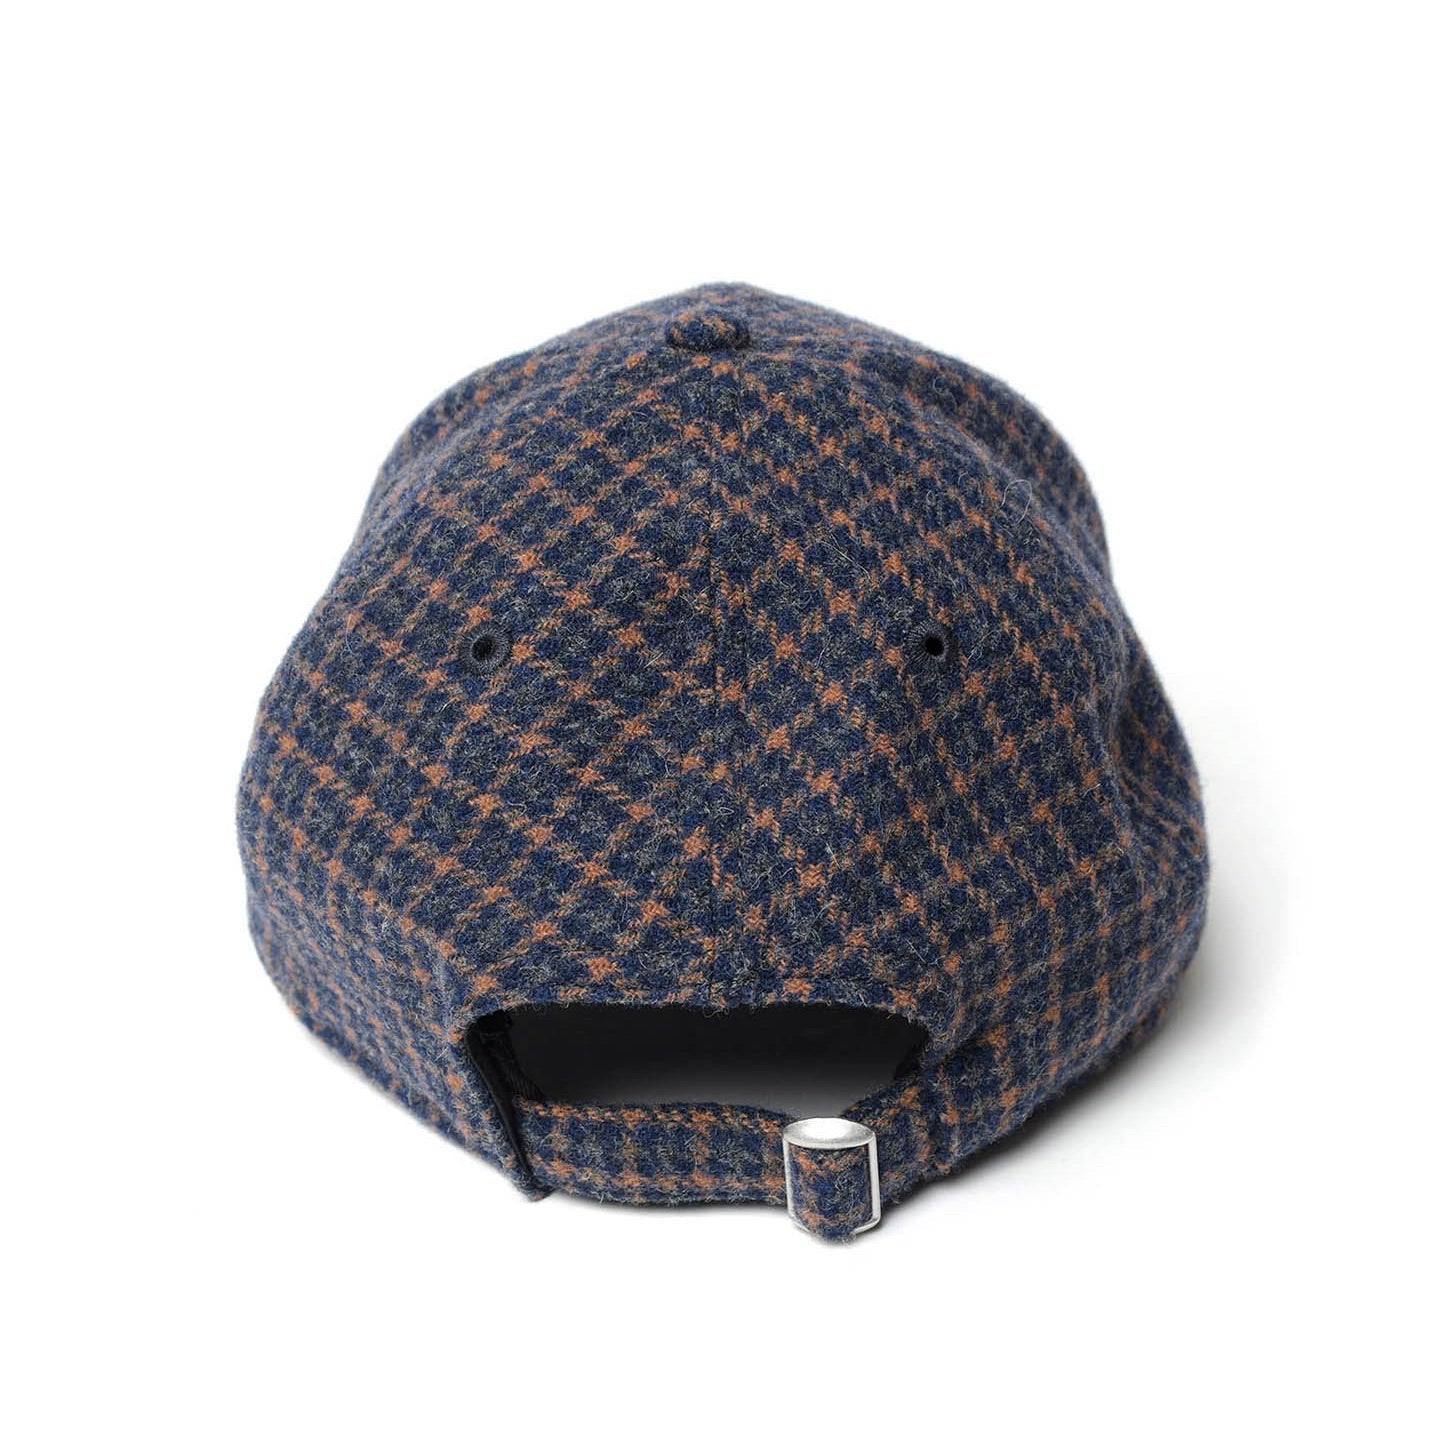 NEW ERA BLENDED WOOL 9FORTY CAP*